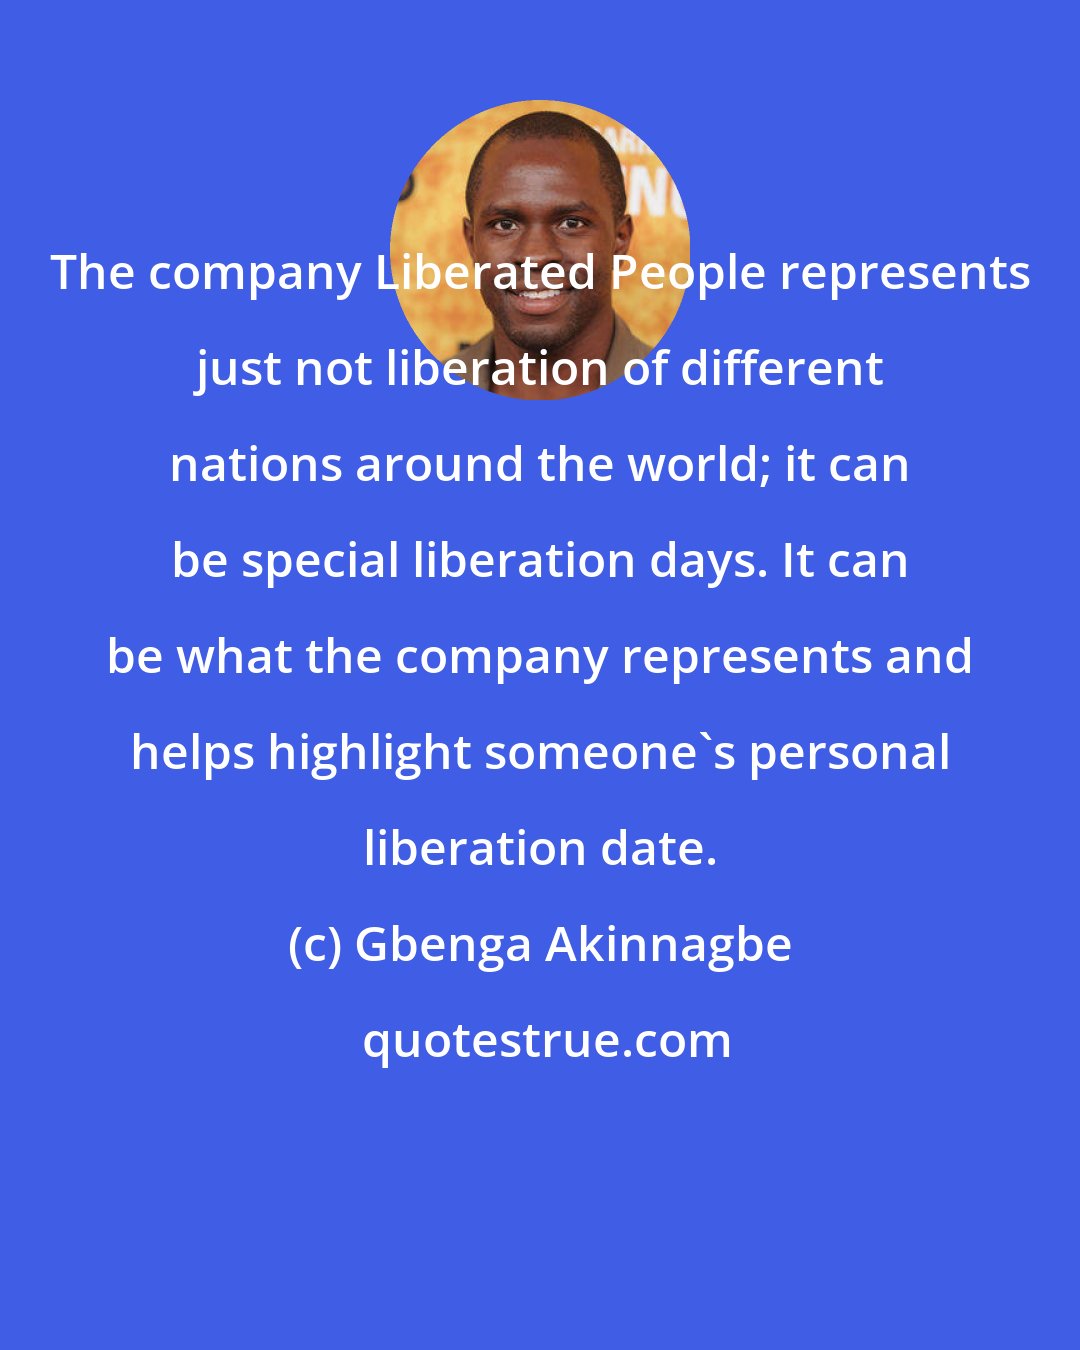 Gbenga Akinnagbe: The company Liberated People represents just not liberation of different nations around the world; it can be special liberation days. It can be what the company represents and helps highlight someone's personal liberation date.